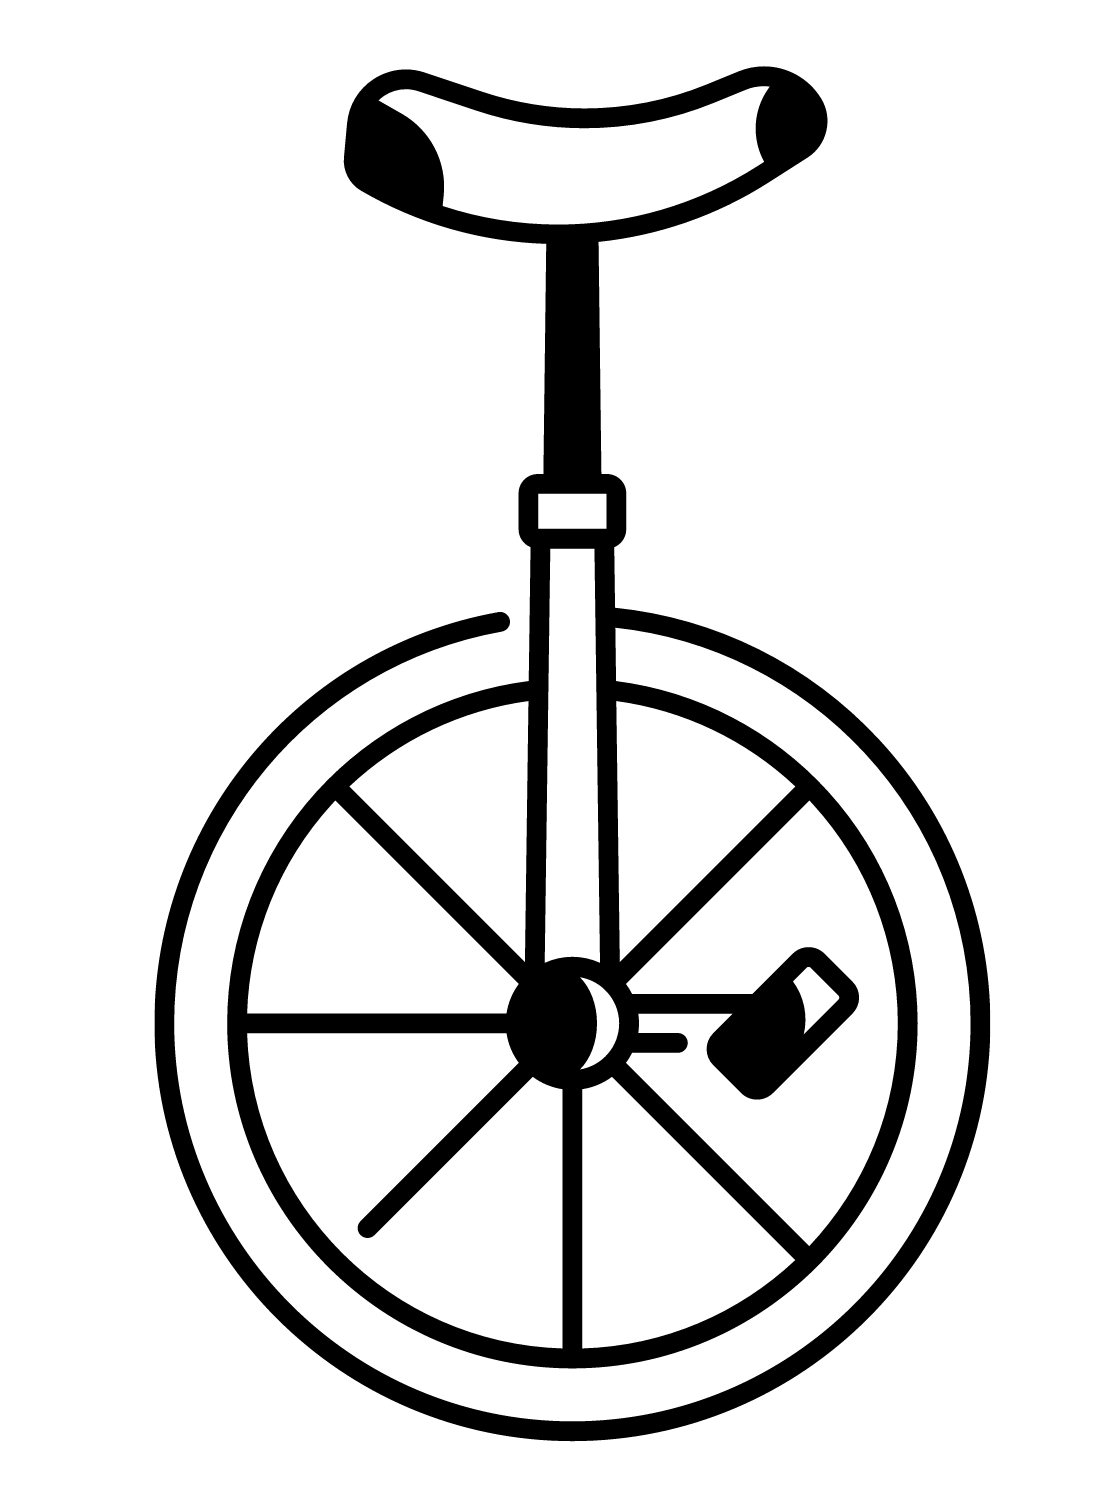 Unicycle coloring pages printable for free download